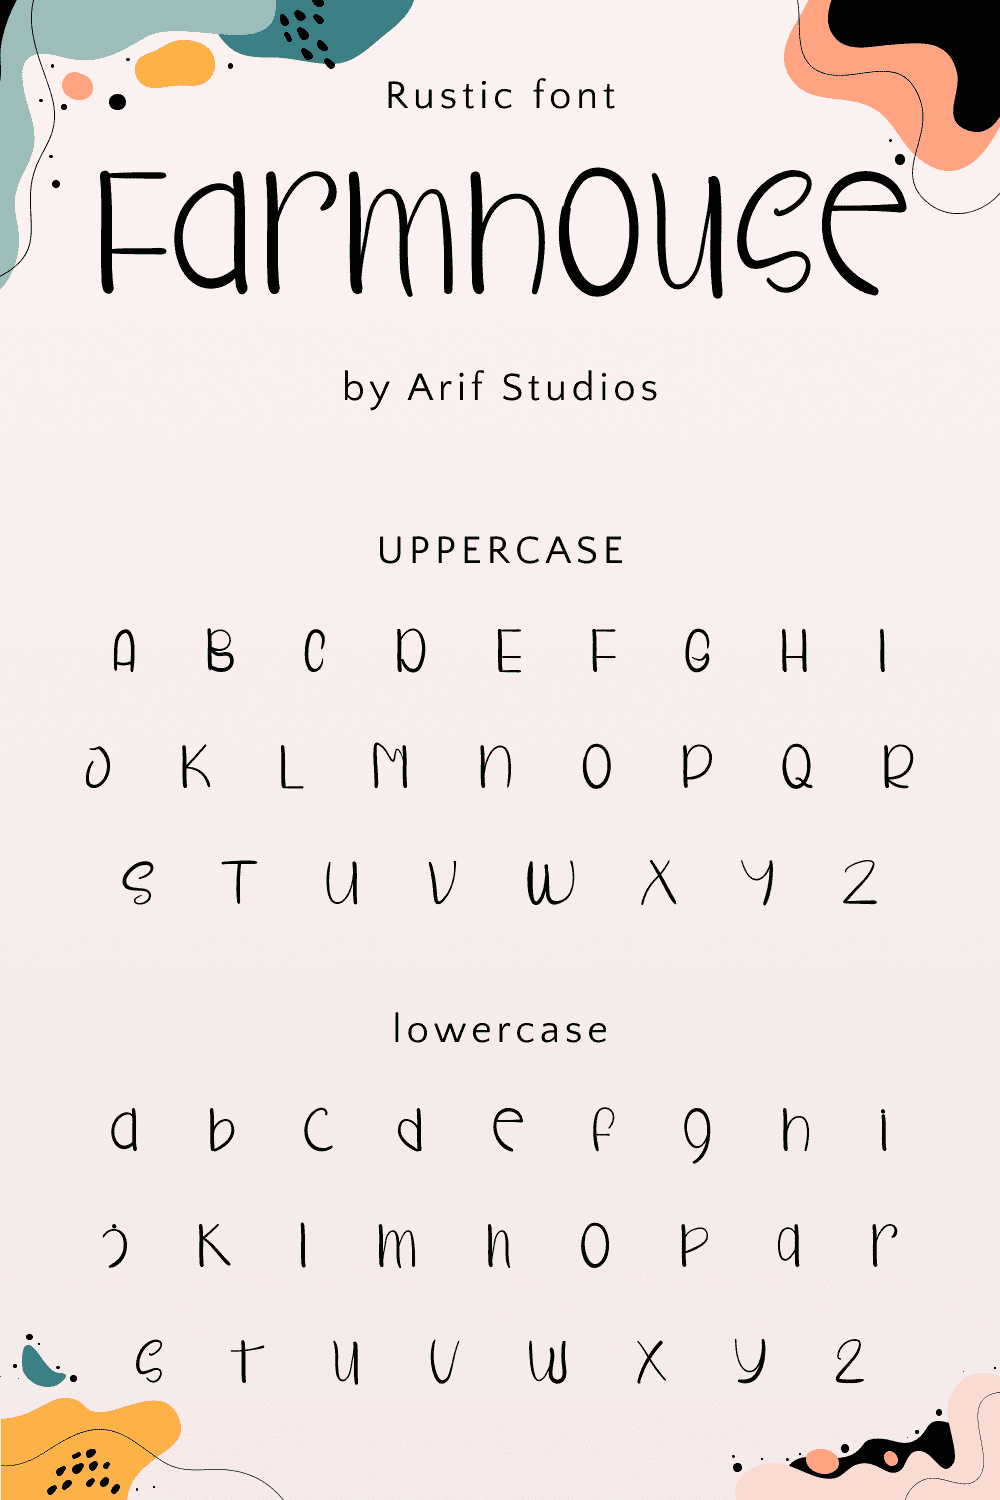 Free rustic farmhouse font Pinterest preview with alphabet.